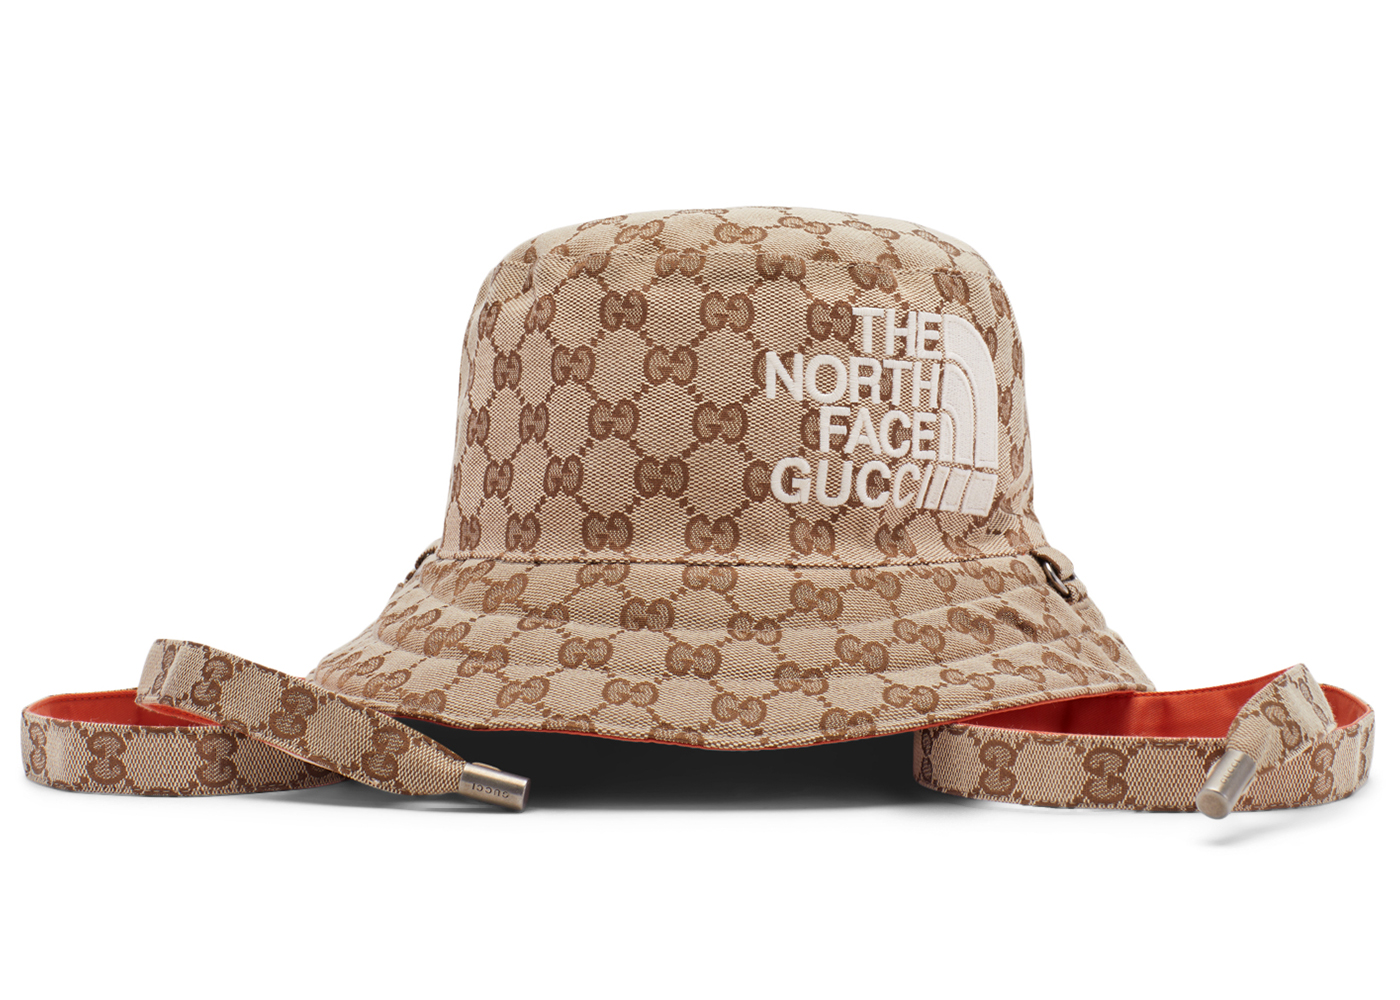 THE NORTH FACE x GUCCI GG バケットハット - ハット